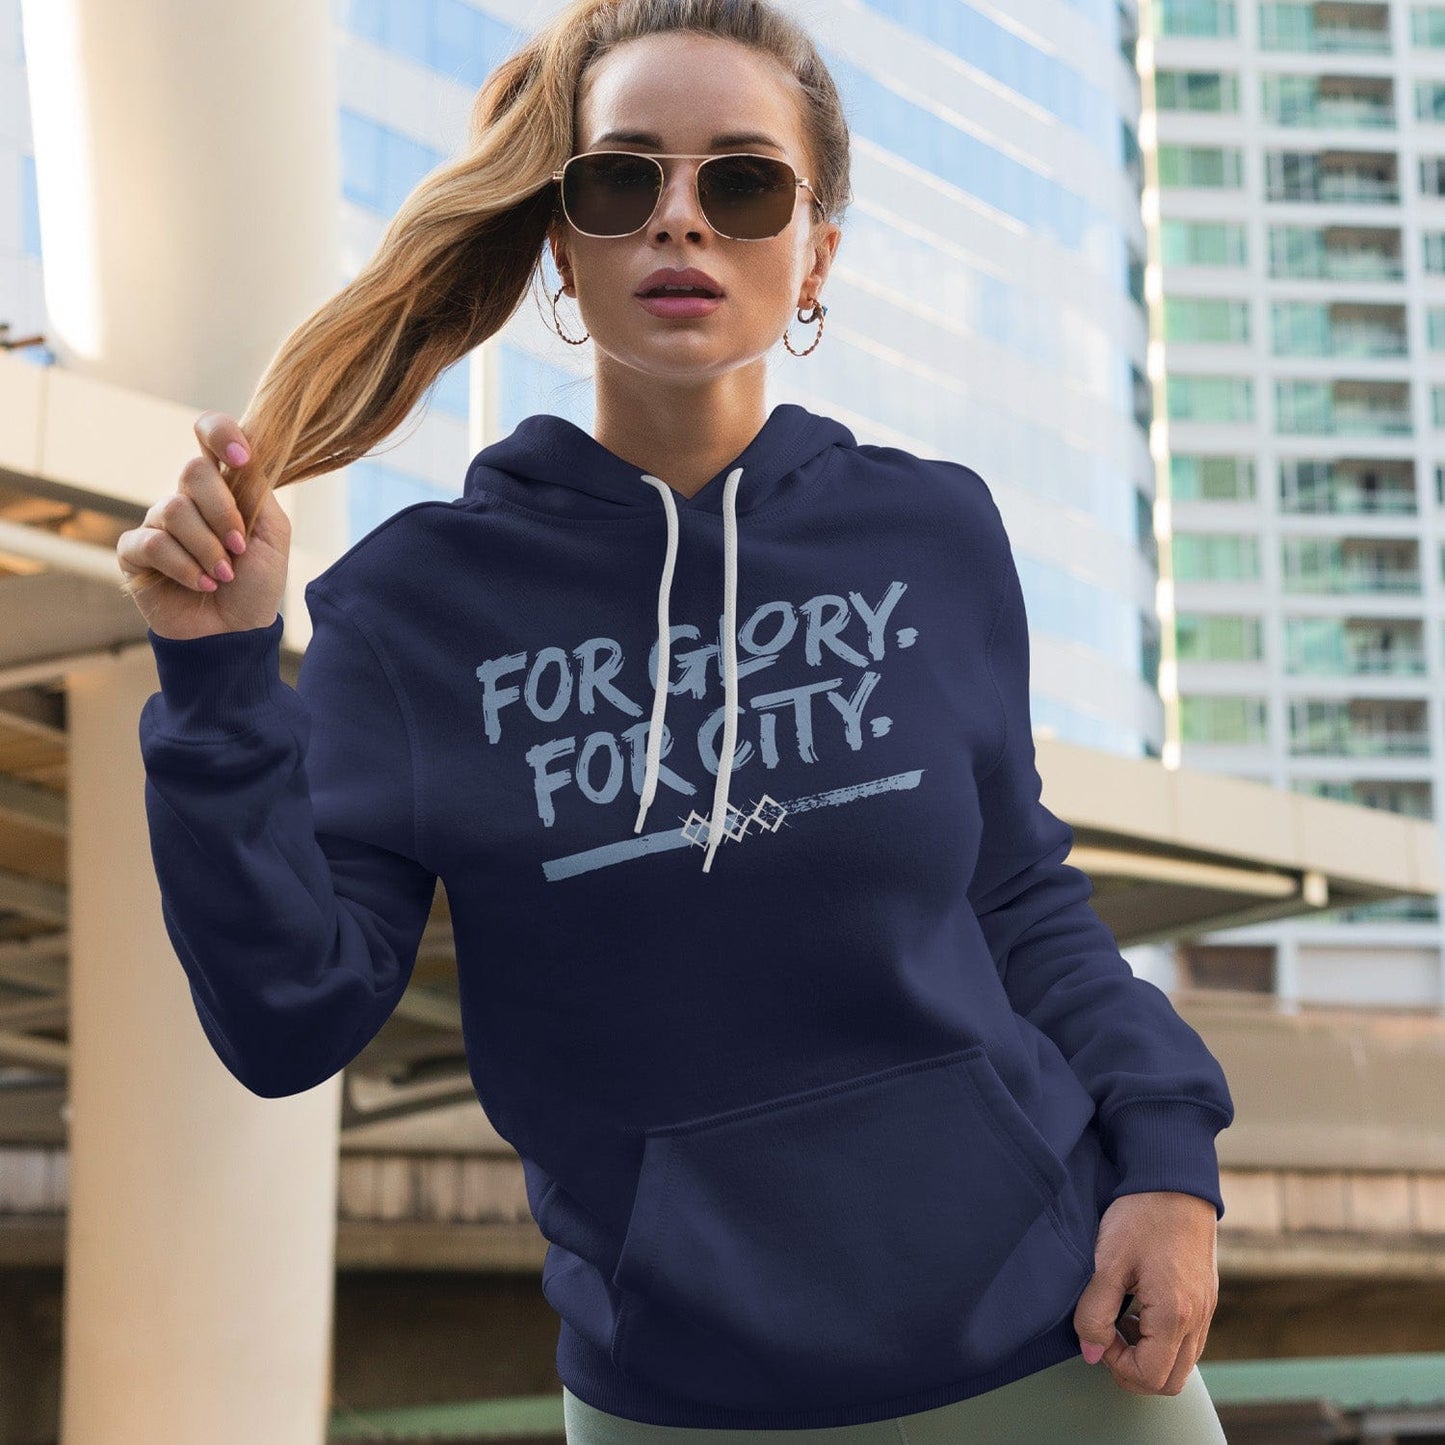 KC Swag Sporting Kansas City navy, powder, white FOR GLORY FOR CITY on navy pullover fleece hoodie worn by female model standing in front of downtown buildings